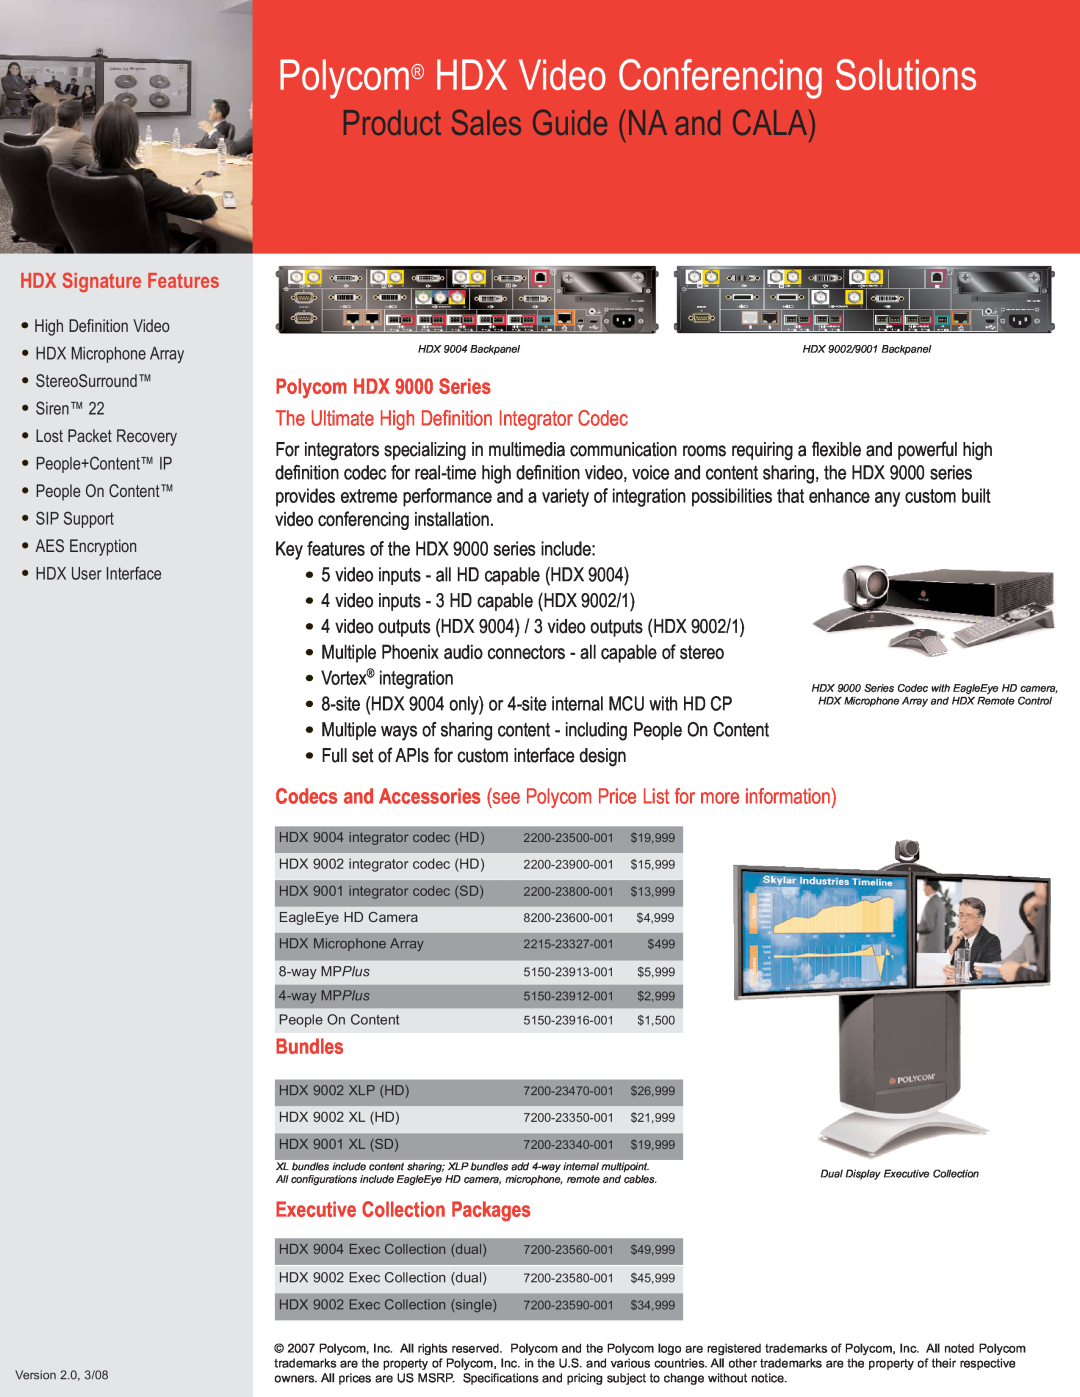 Polycom specifications Product Sales Guide NA and CALA, HDX Signature Features, Polycom HDX 9000 Series, Bundles 